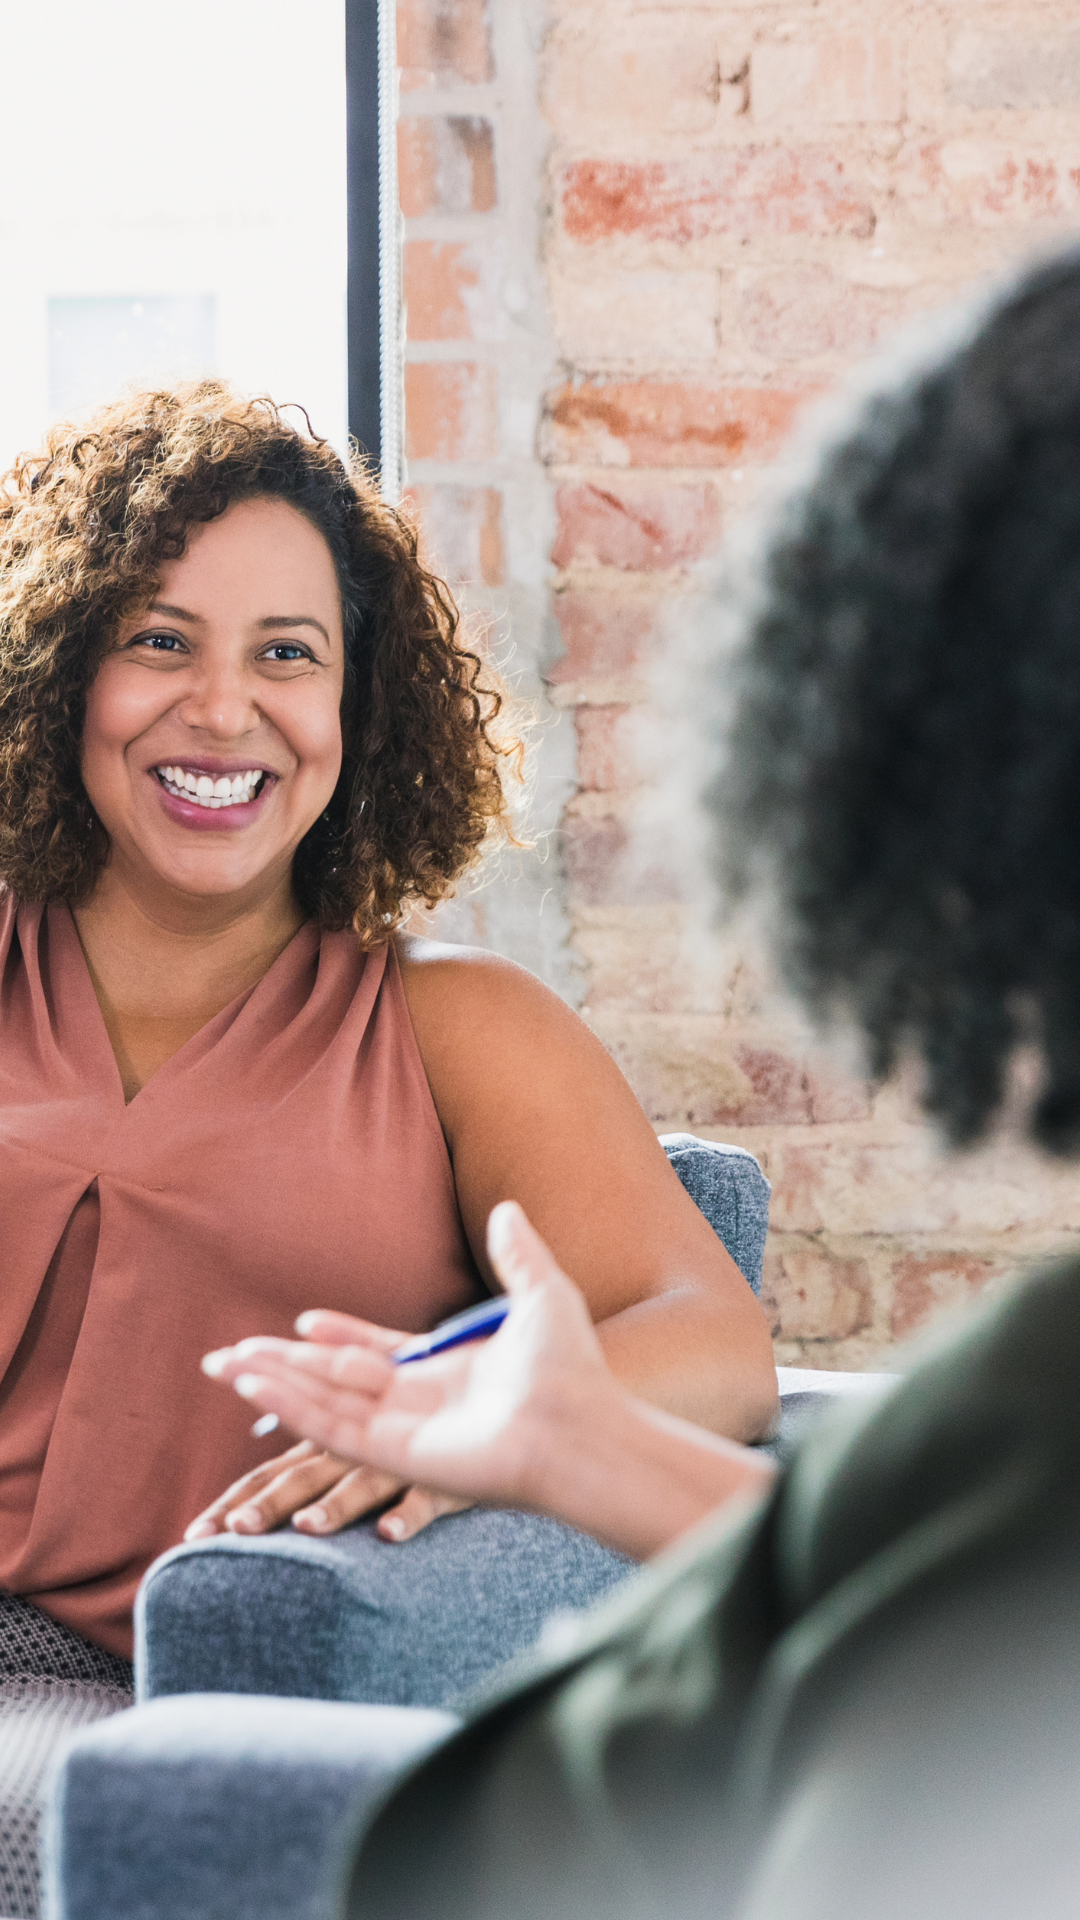 Image of a Black woman seated in conversation while speaking to a Black female therapist. Showing one way that therapy can provide relief. Talking with a therapist can help reduce mental health symptoms in Atlanta, GA